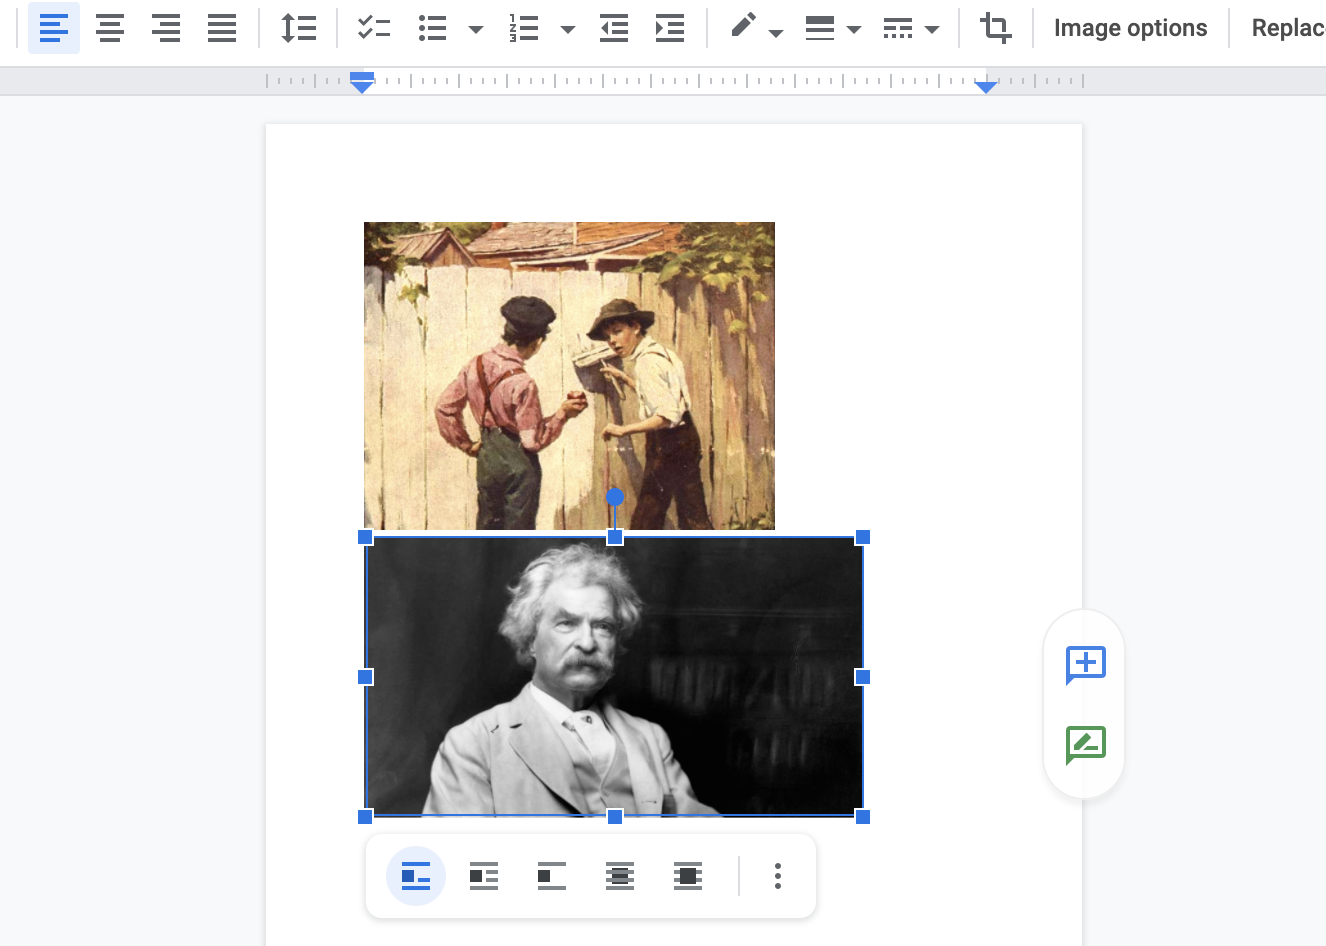 A Google doc with two photos, one black and white and one in color